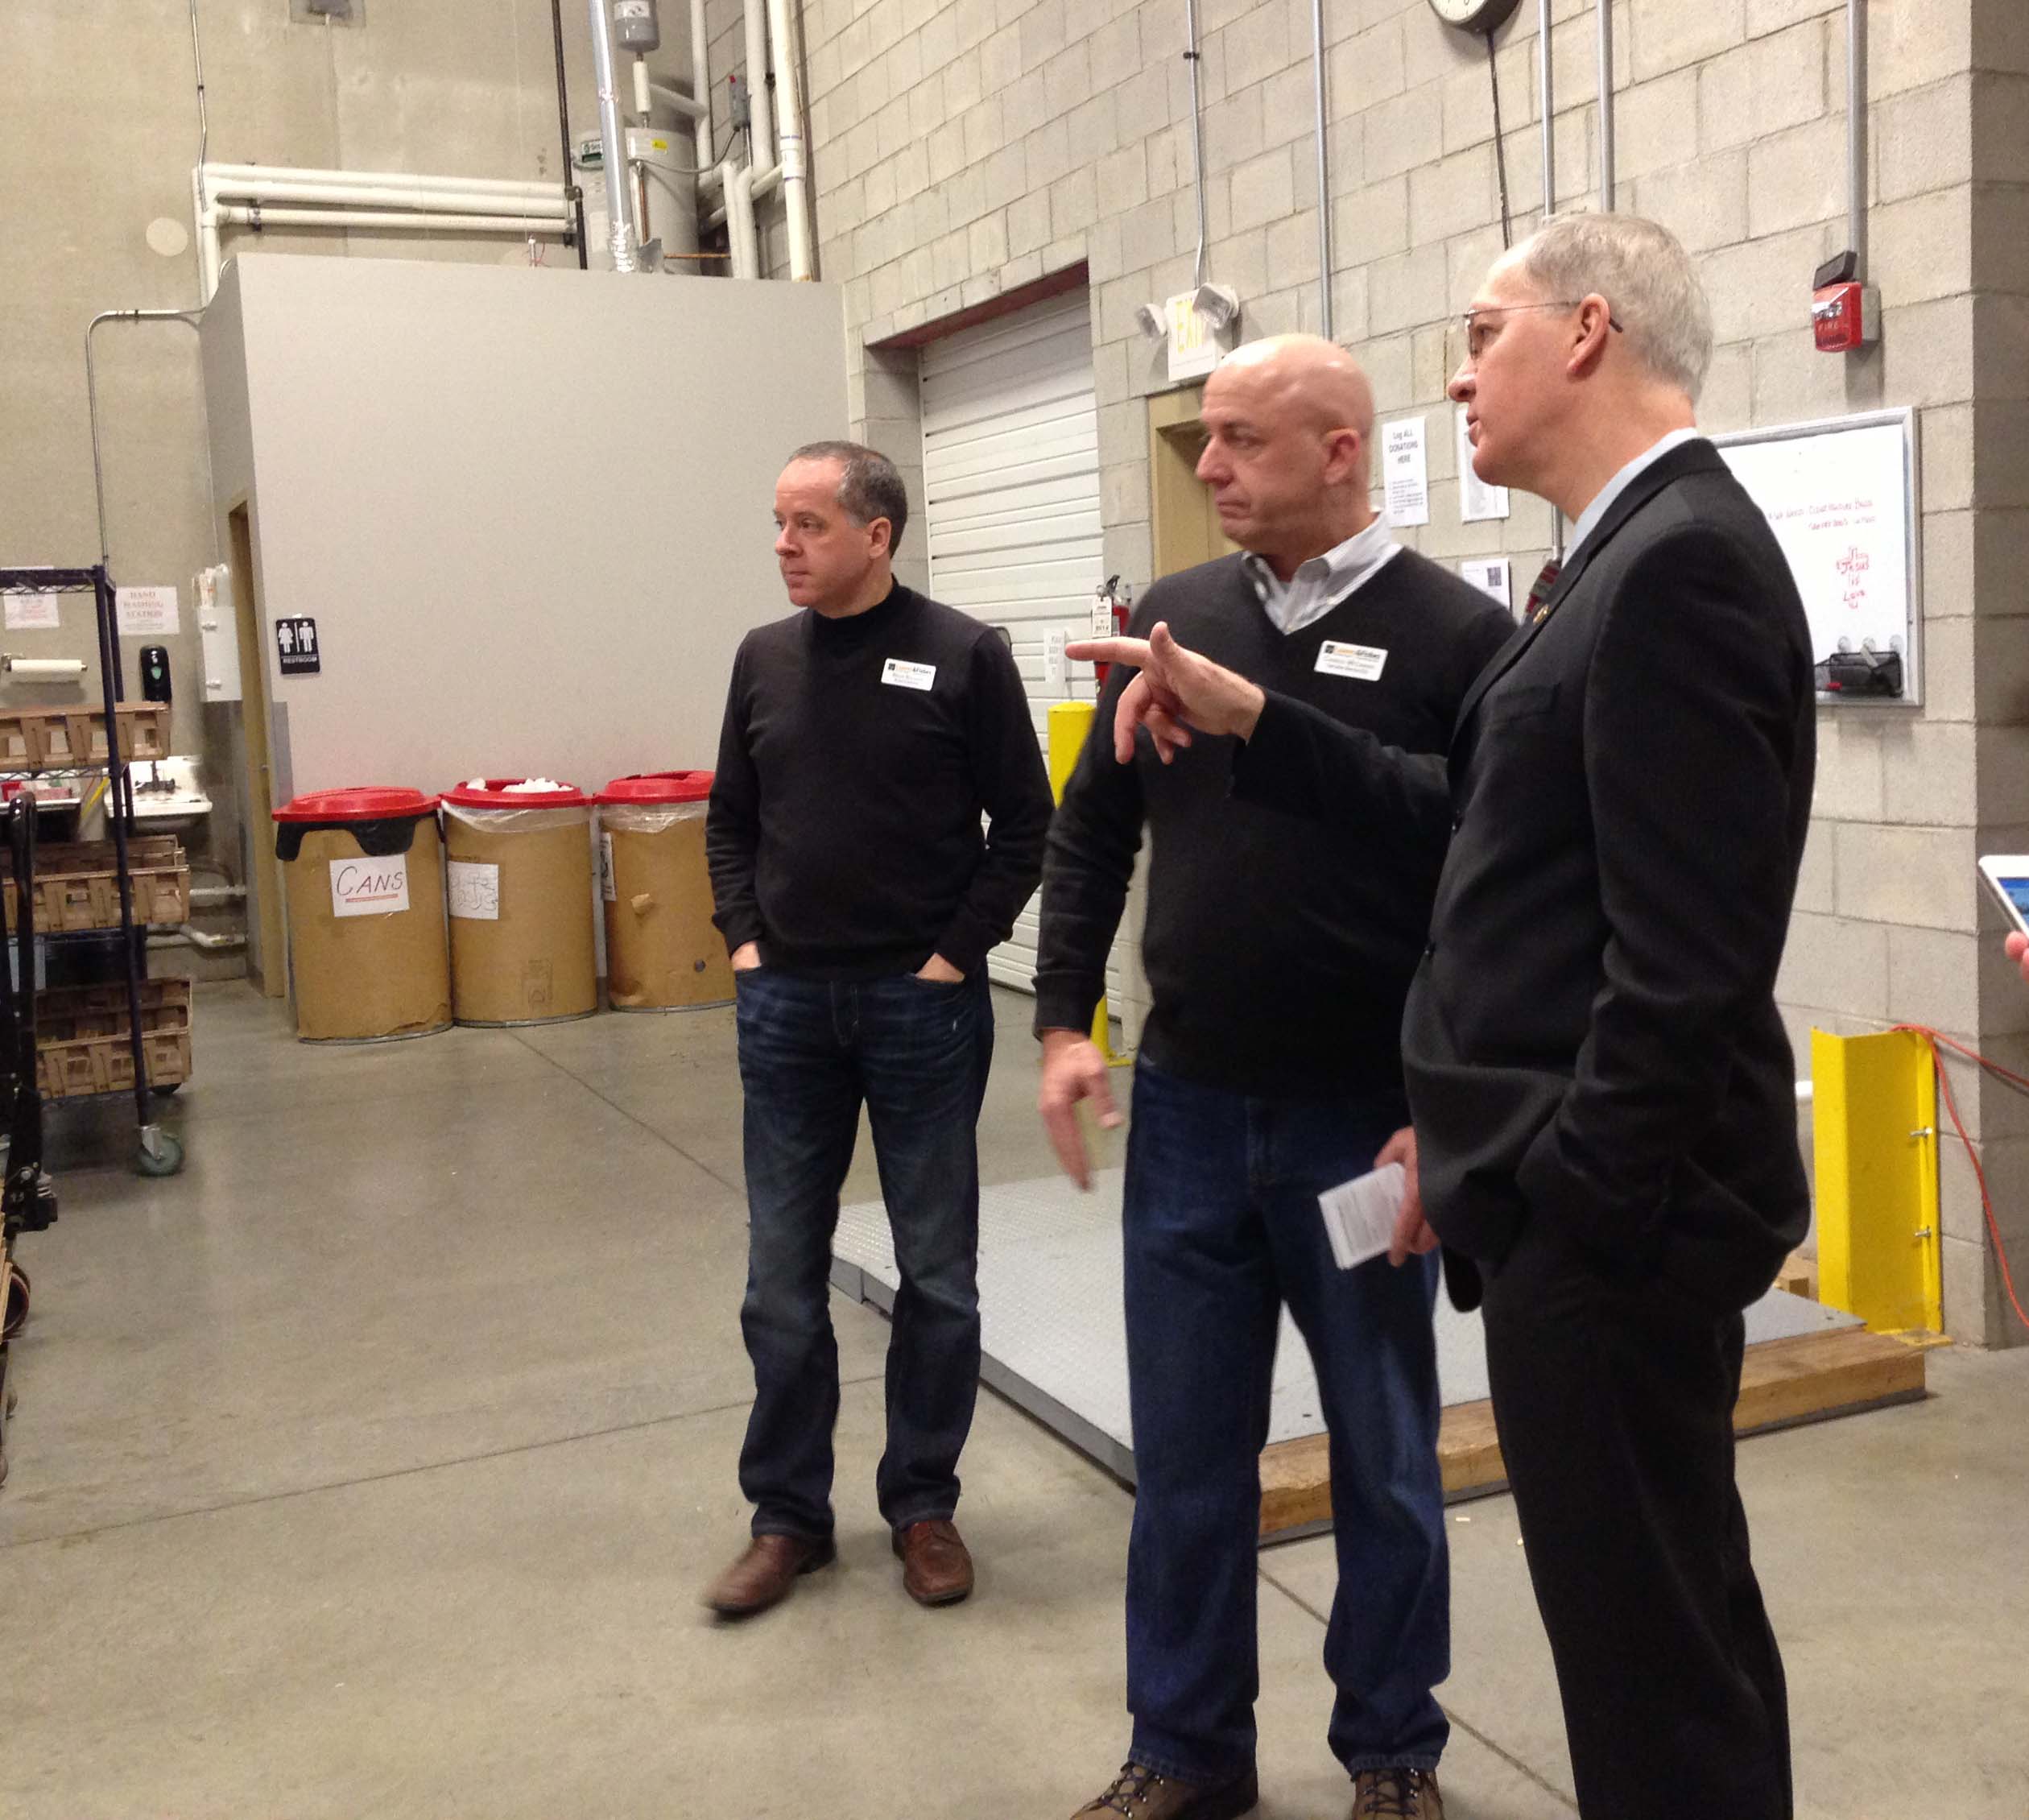 (l-r) Board Member Brian Bolliger, Charles McLimans, Congressman Foster tour the sorting area of warehouse.